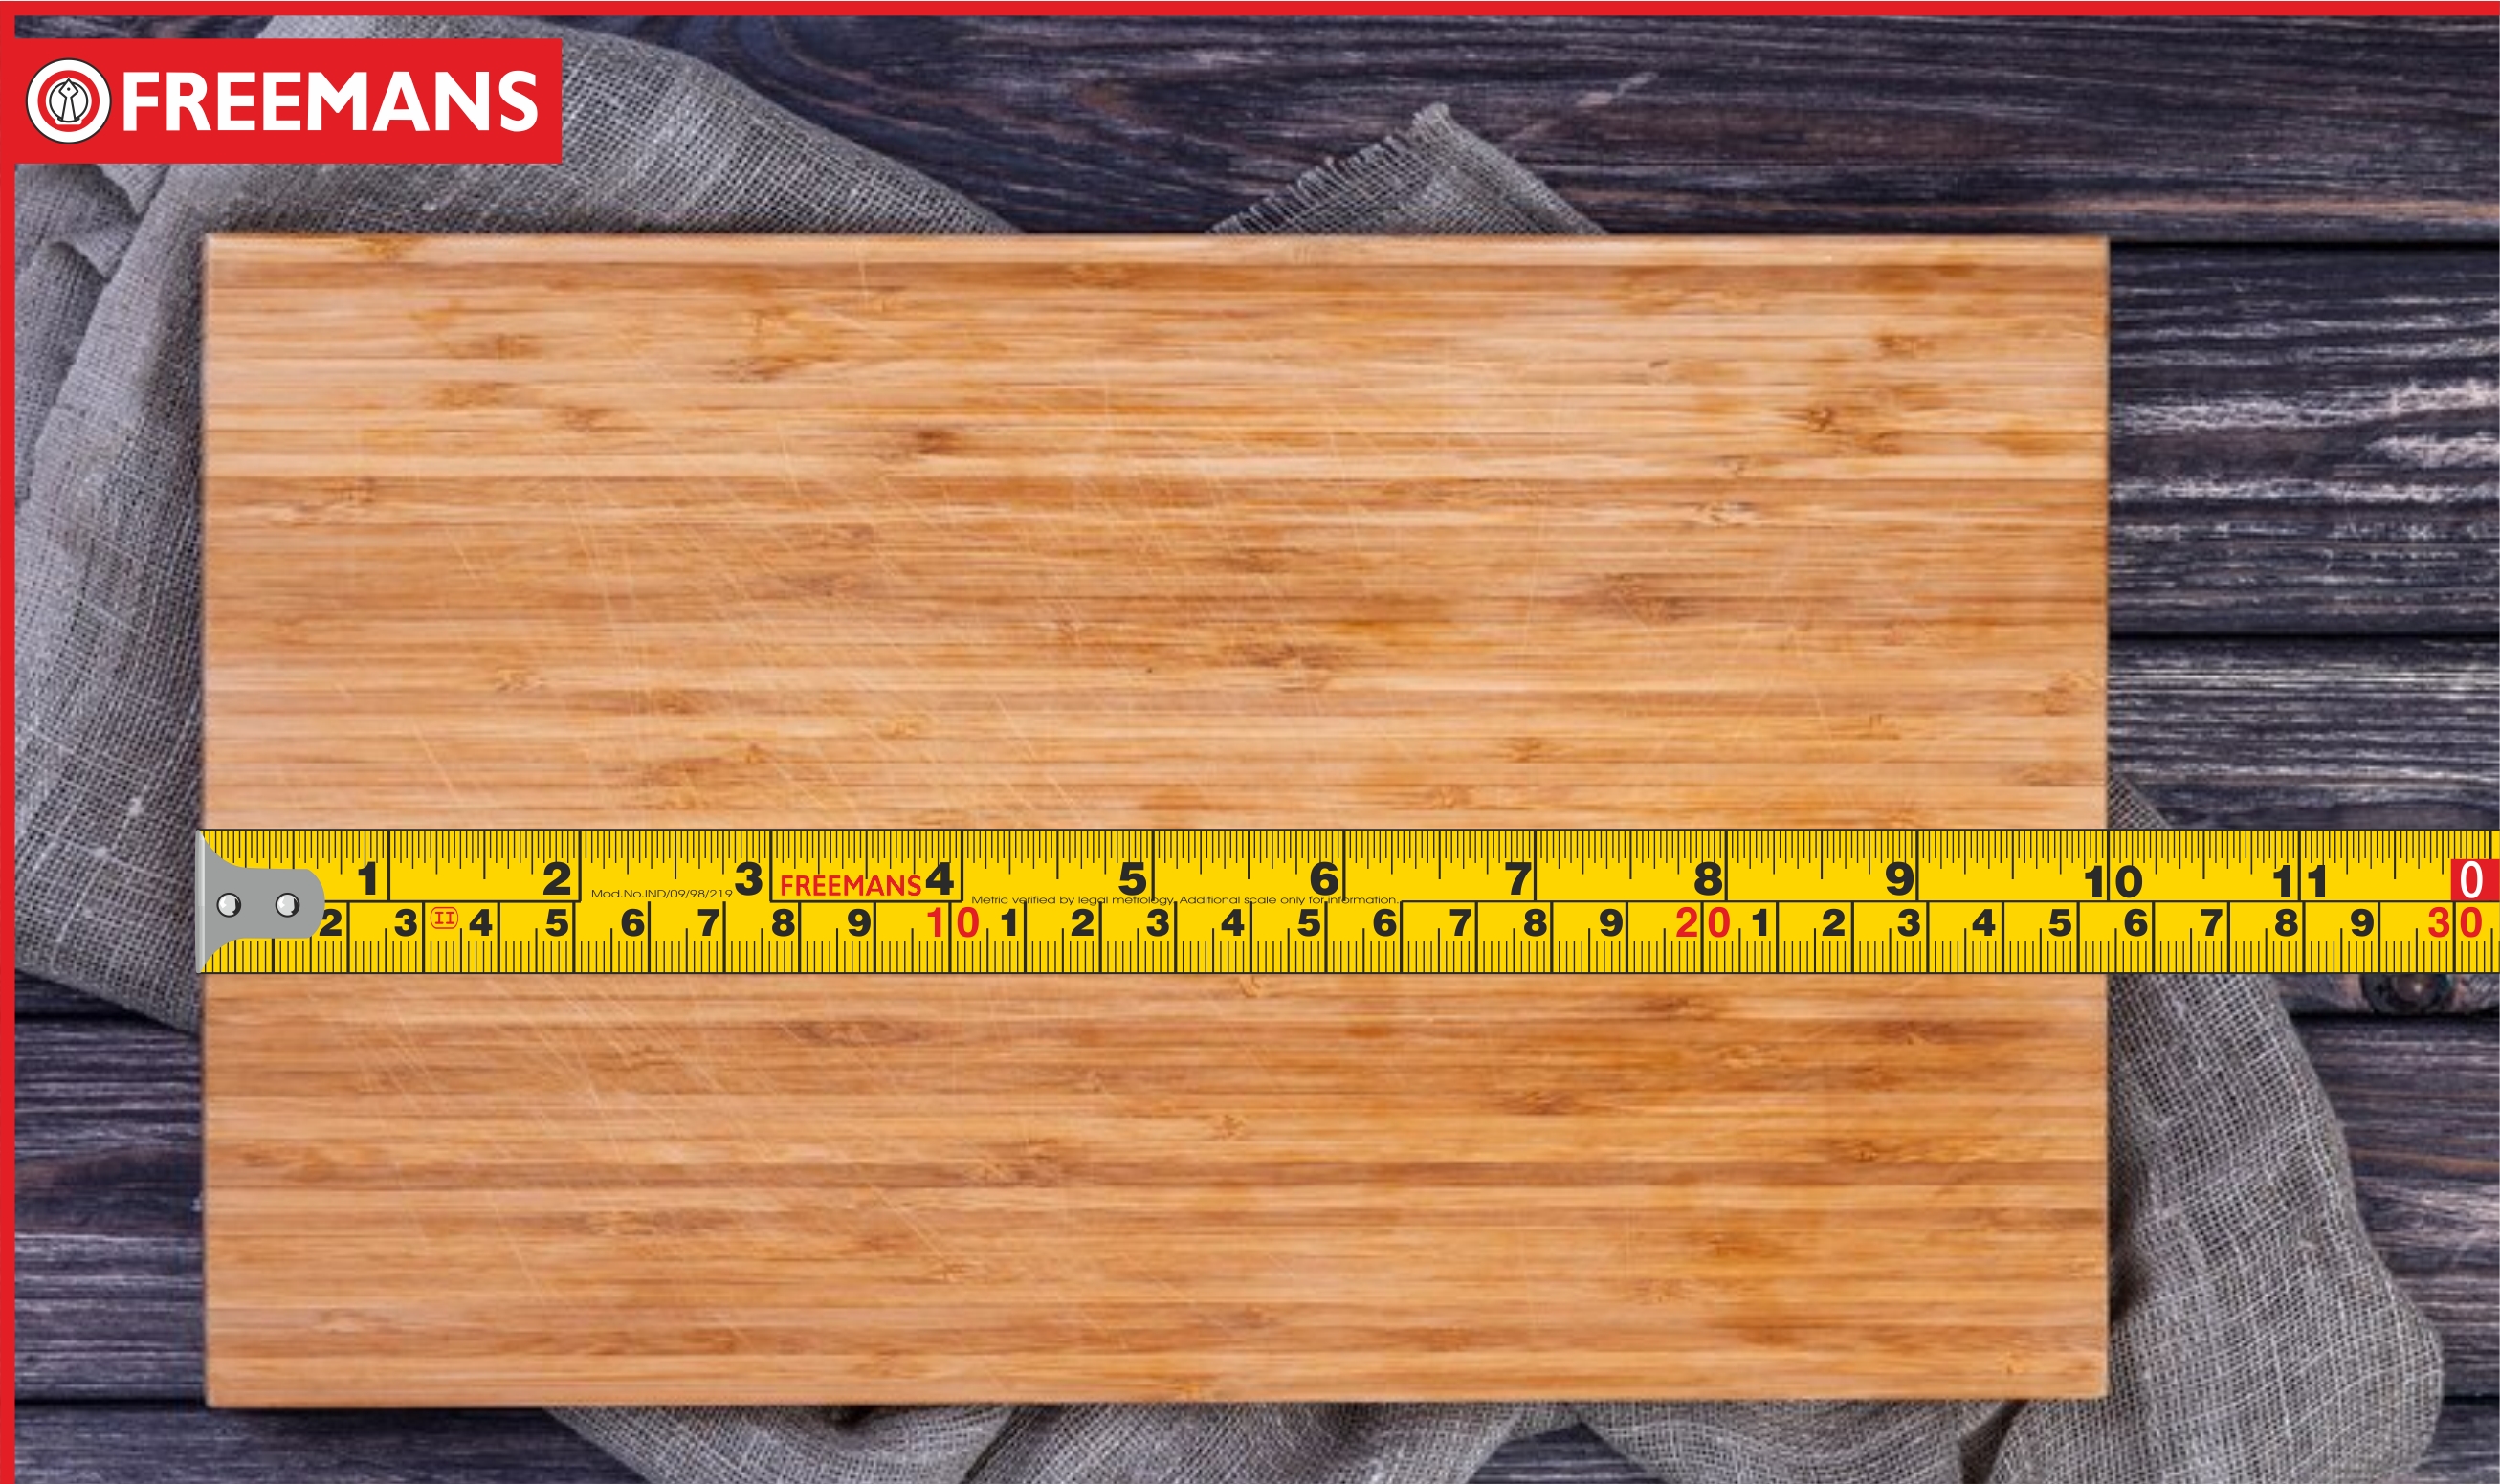 How to read a measuring tape - blog